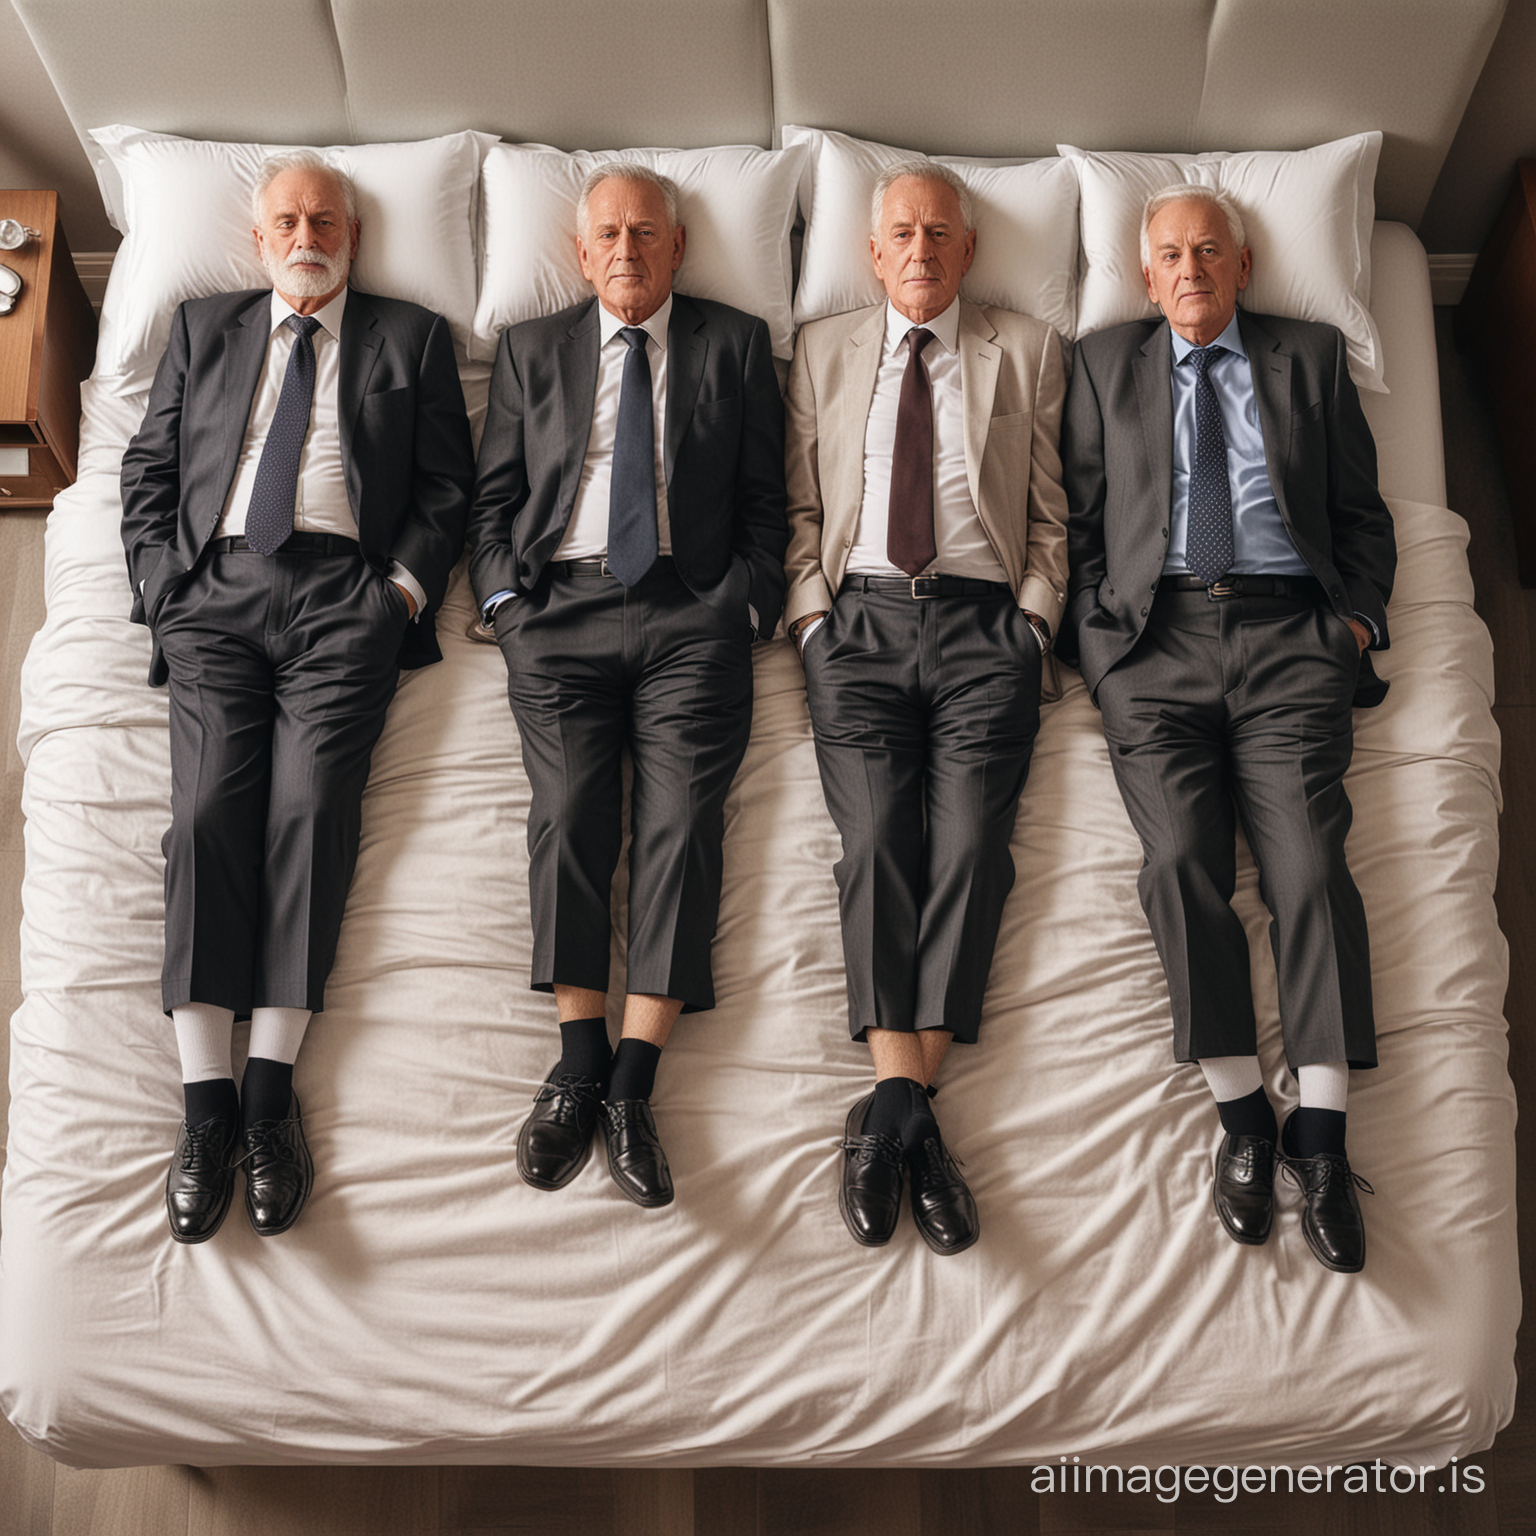 Four elderly senior businessmen, wearing different suits, socks and dress shoes, dead peacefully on four beds, full body shot